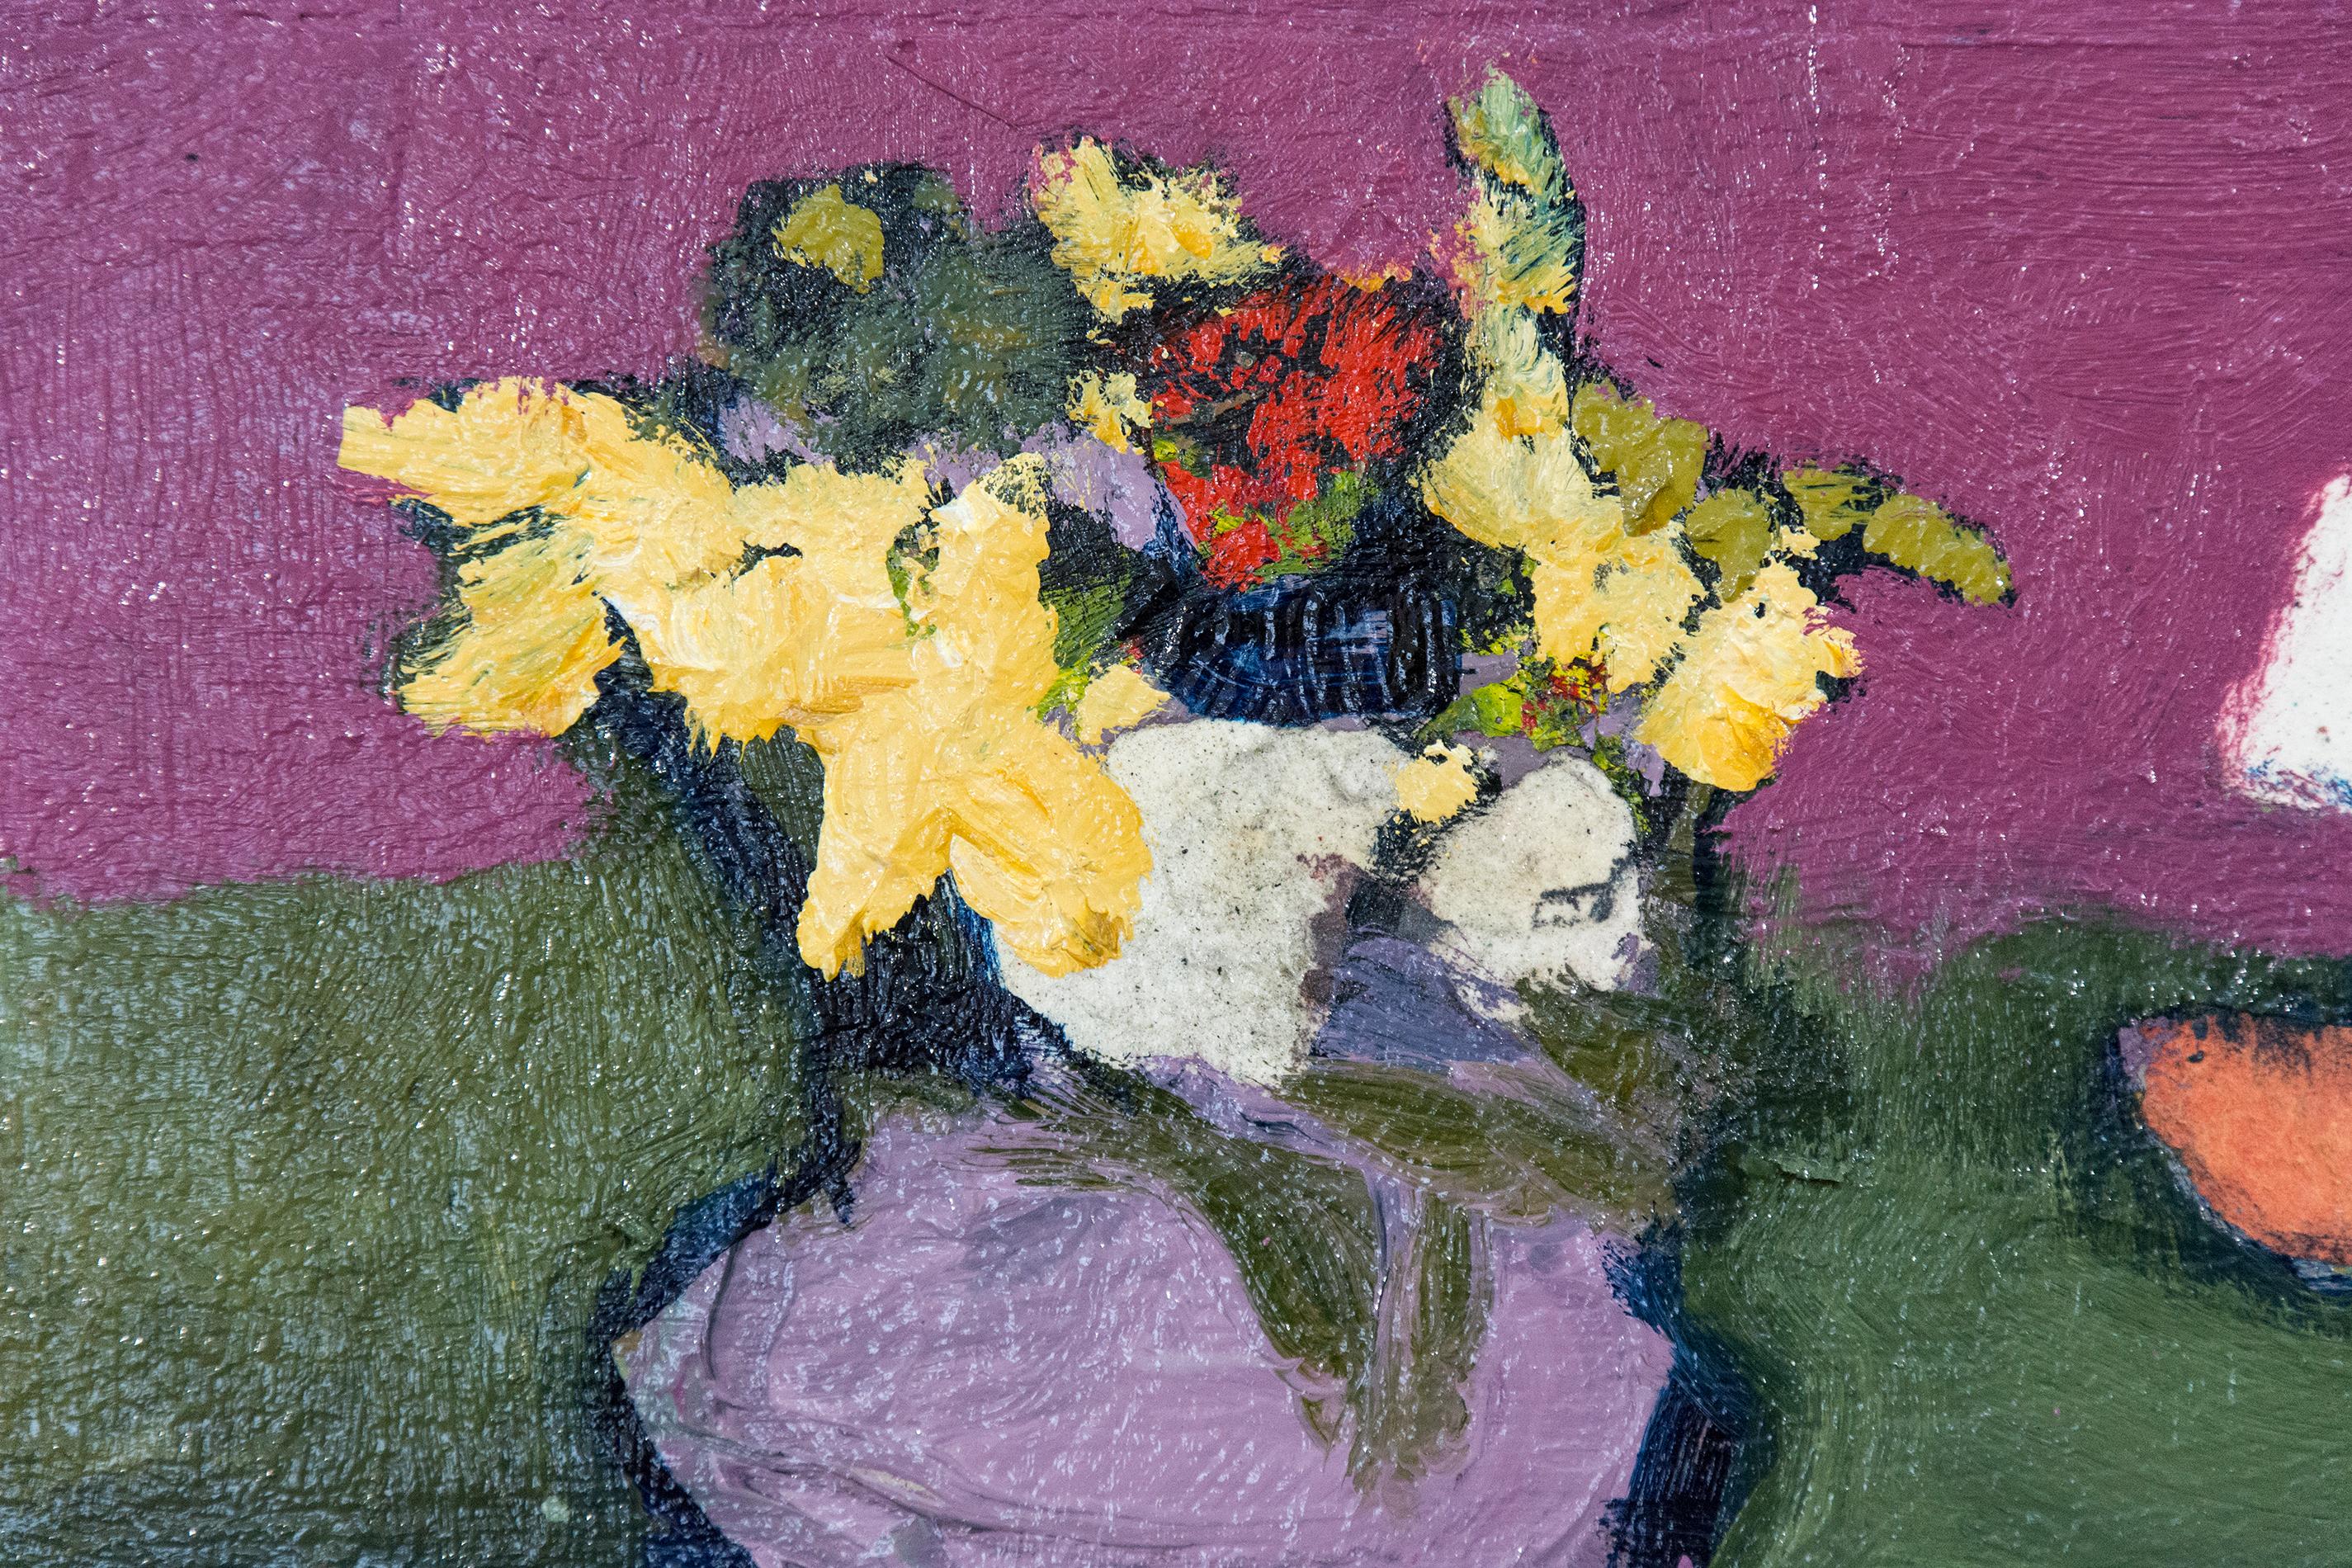 A bouquet of yellow in a vase of mauve sits in a landscape of forest green and magenta in this delightful oil by Jennifer Hornyak. Framed dimensions are 9 x 23.5 inches.

Inspired by German Expressionism and the French Fauvist masters such as